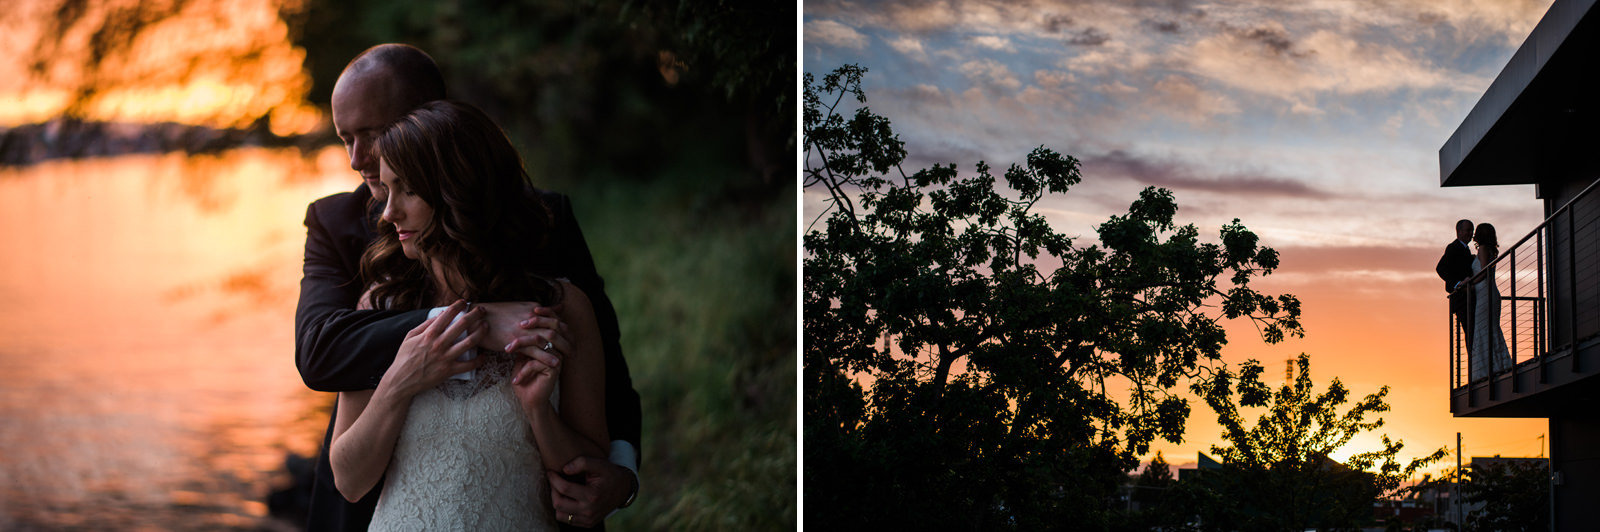 138-sunset-portraits-at-fremont-foundry-by-top-seattle-wedding-photographer-ryan-flynn.jpg